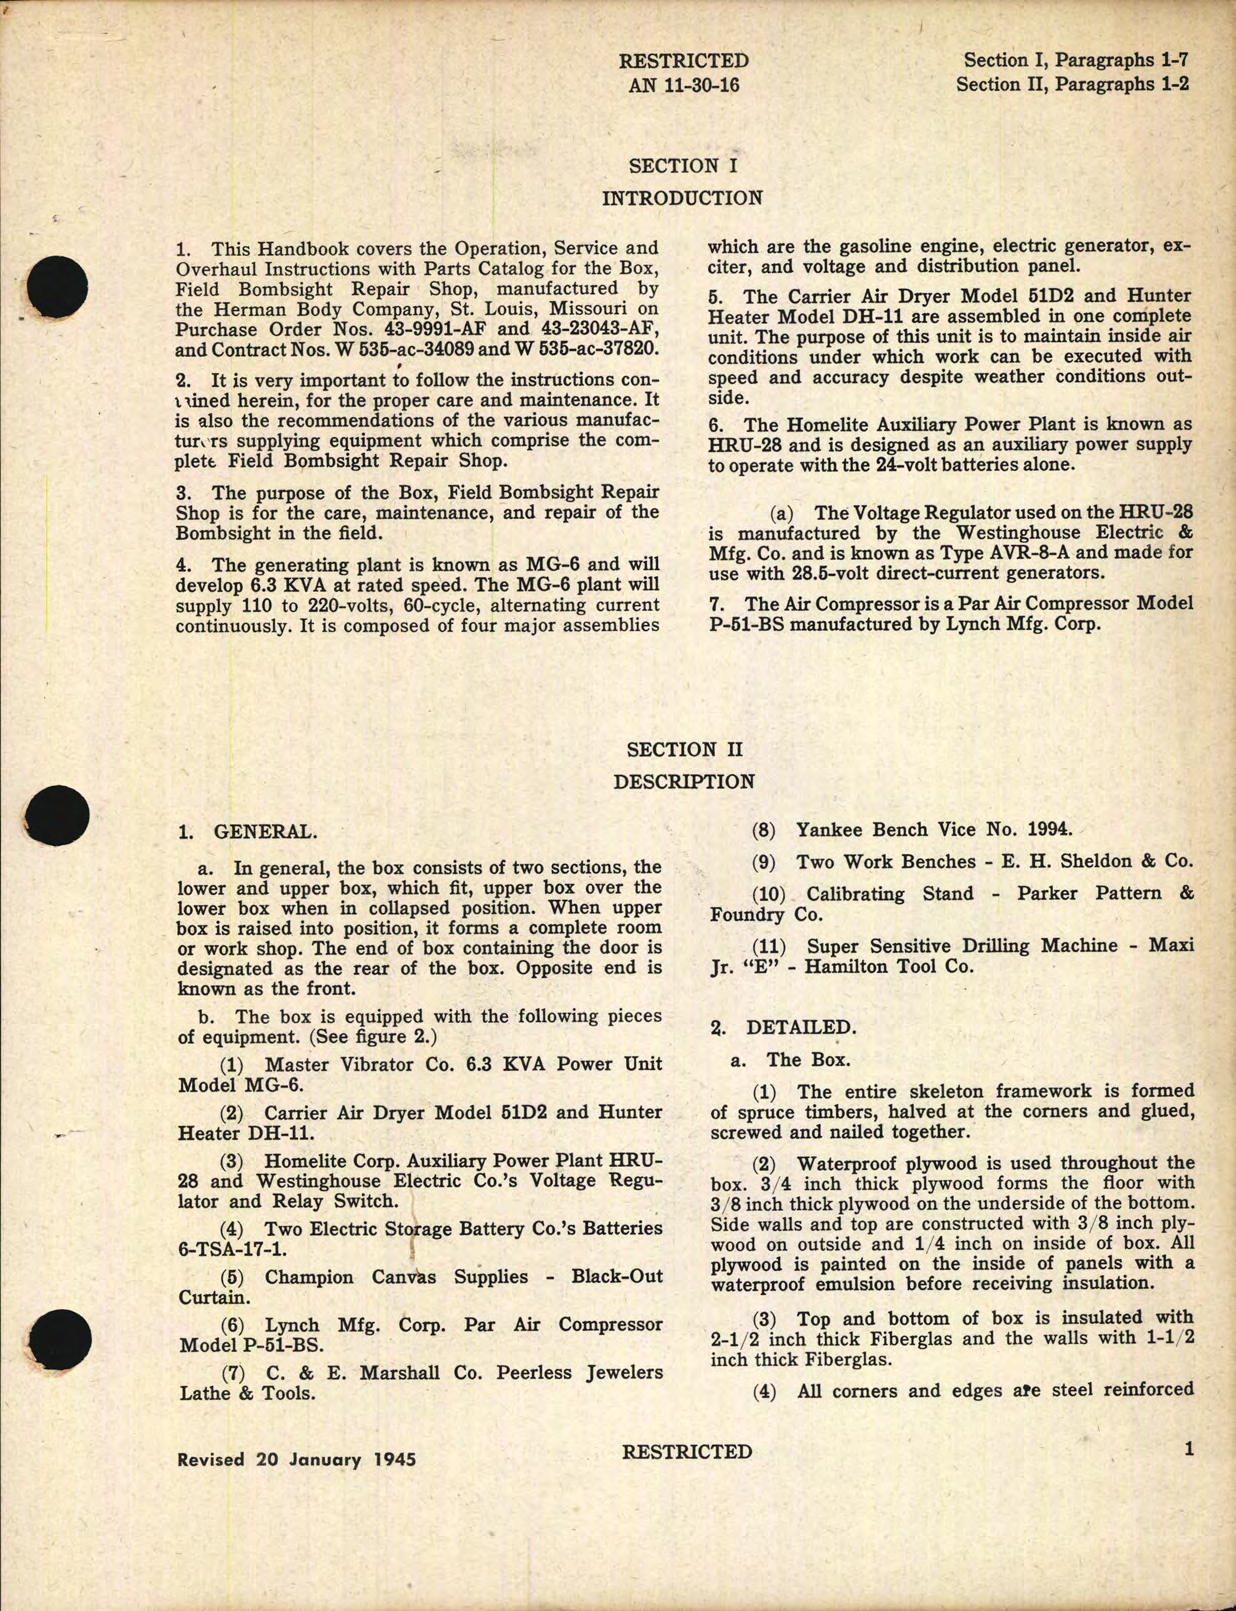 Sample page 5 from AirCorps Library document: Handbook of Instructions with Parts Catalog for Field Bombsight Repair Shop Box